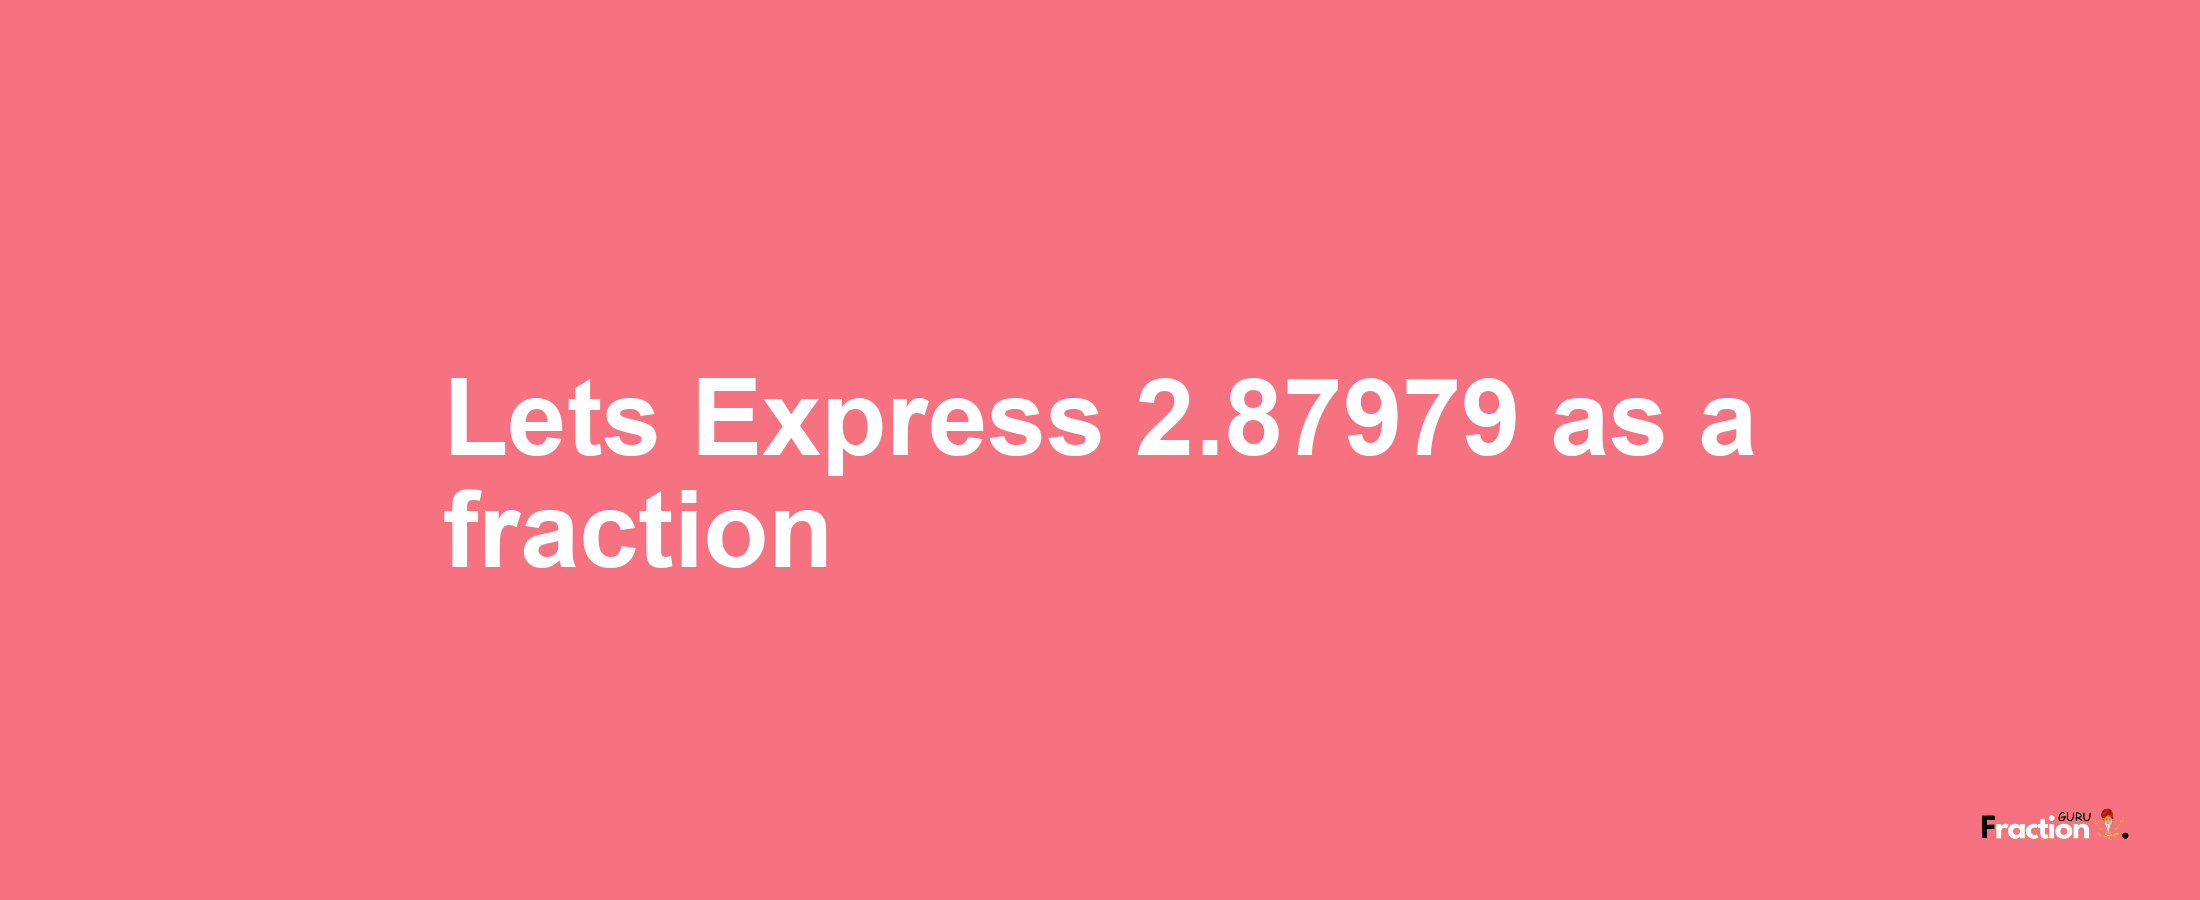 Lets Express 2.87979 as afraction